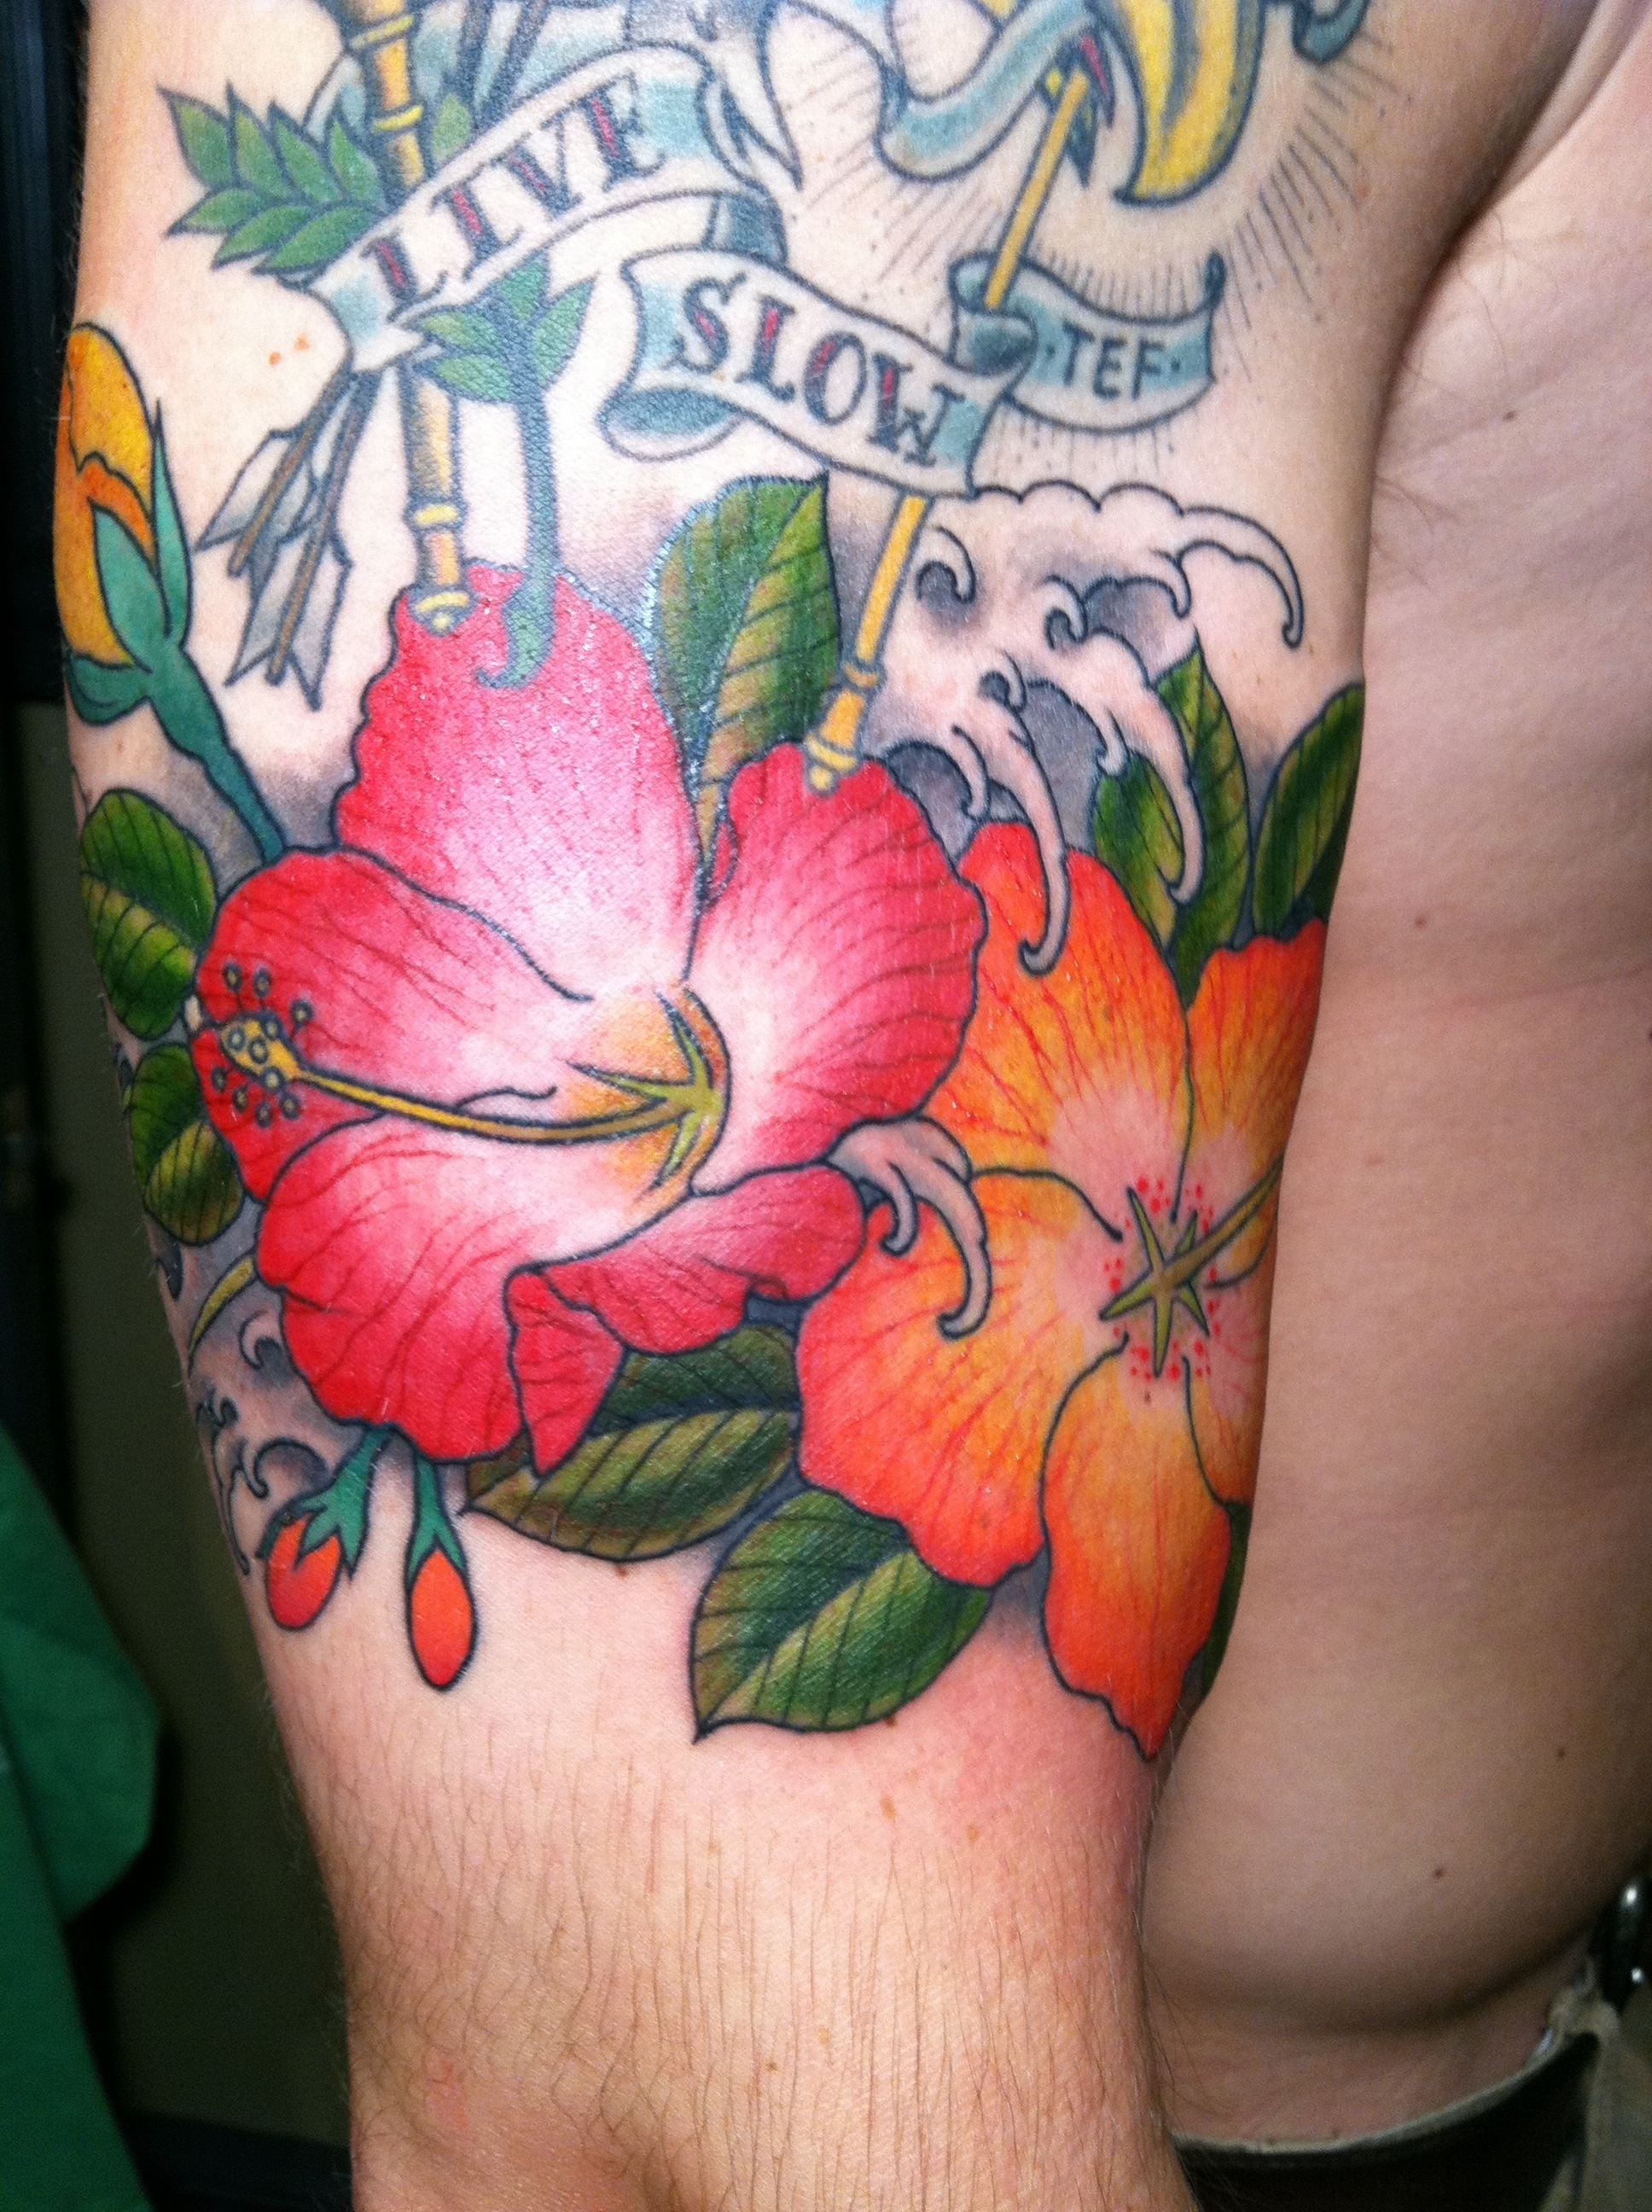 Hibiscus Tattoos Designs, Ideas and Meaning | Tattoos For You